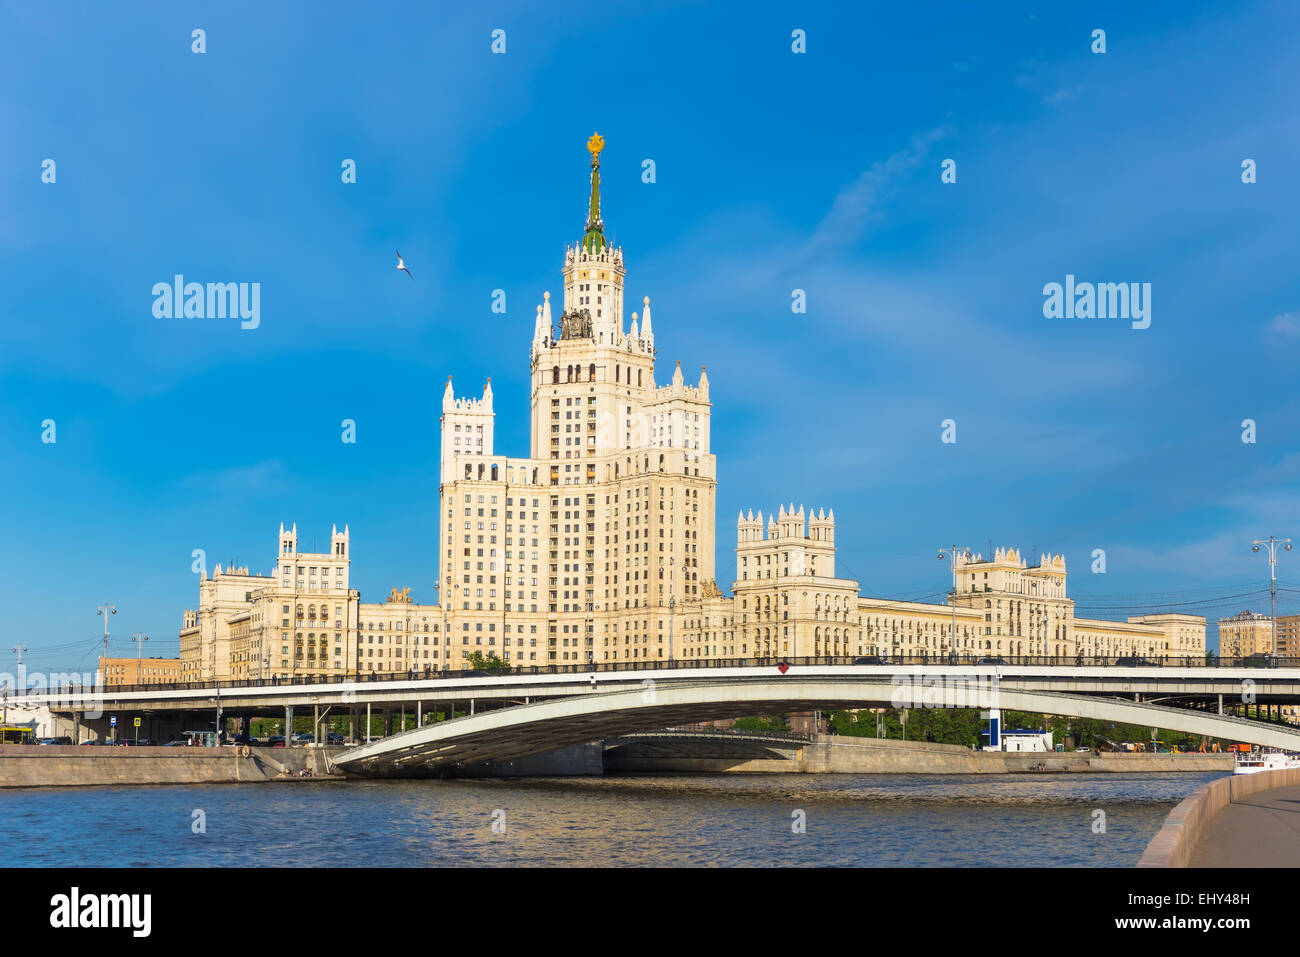 The stalinist skyscraper on the Kotelnicheskaya embankment in Moscow, Russia Stock Photo